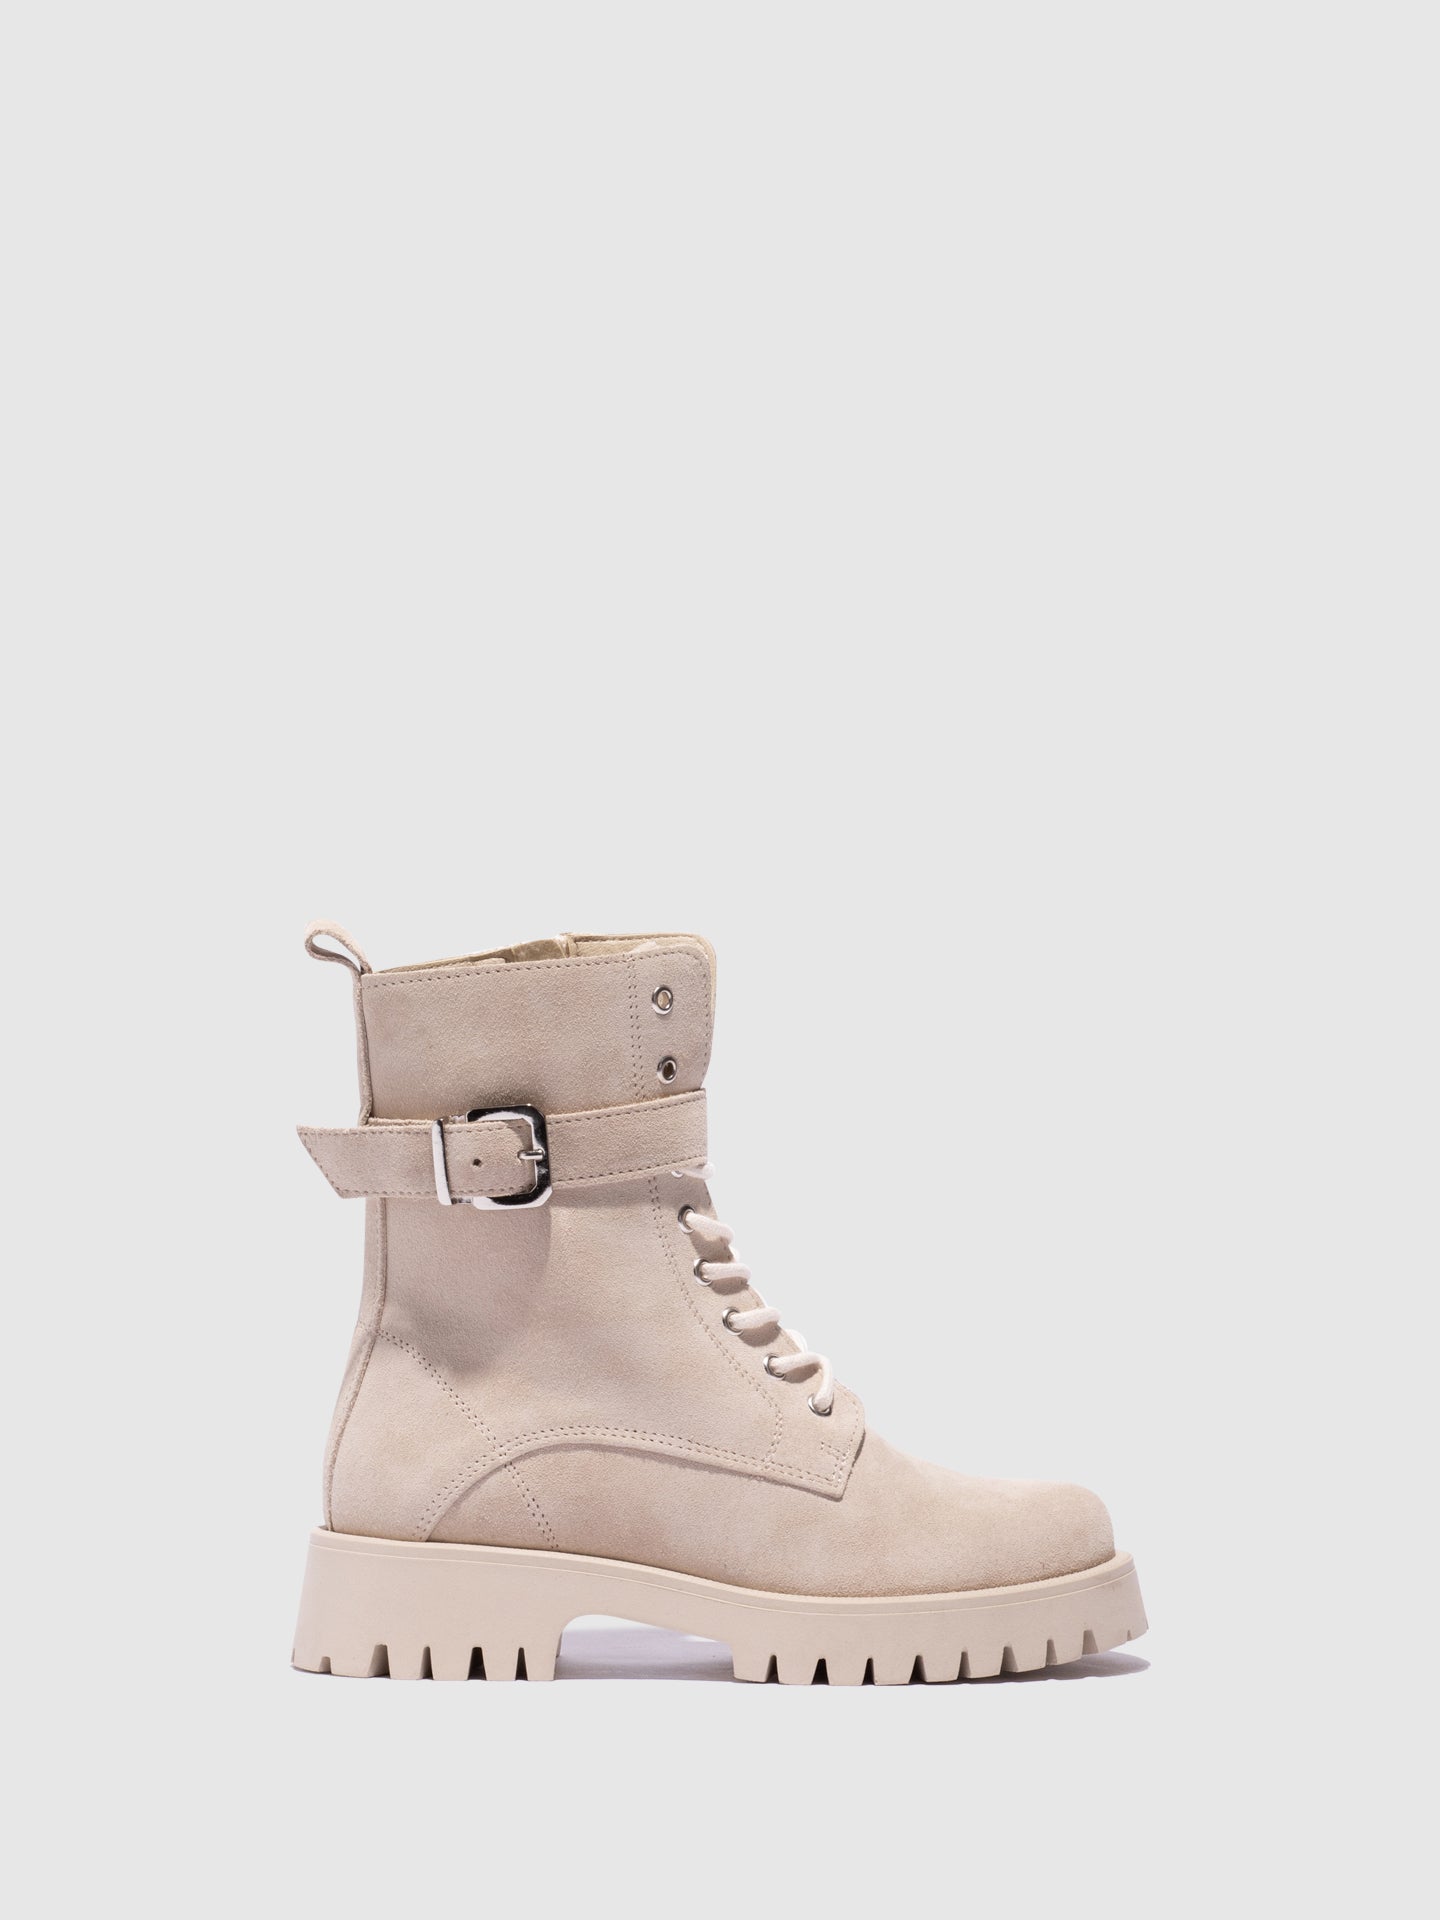 Foreva Beige Lace-up Ankle Boots